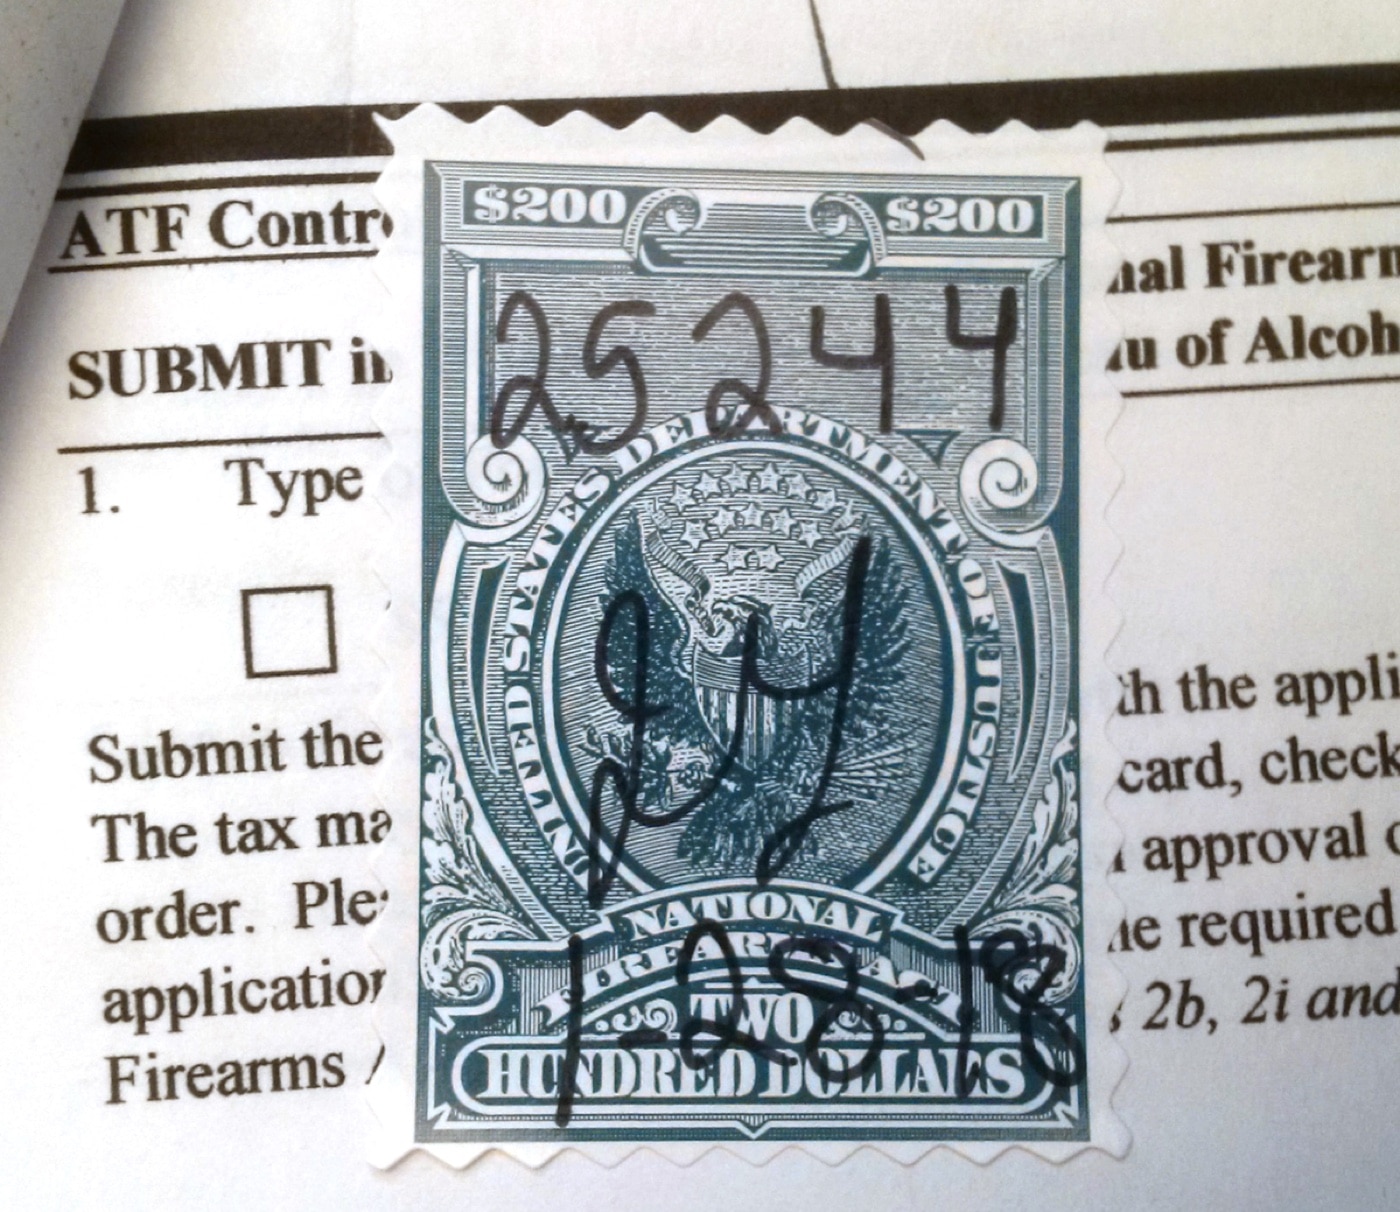 NFA stamp for firearm